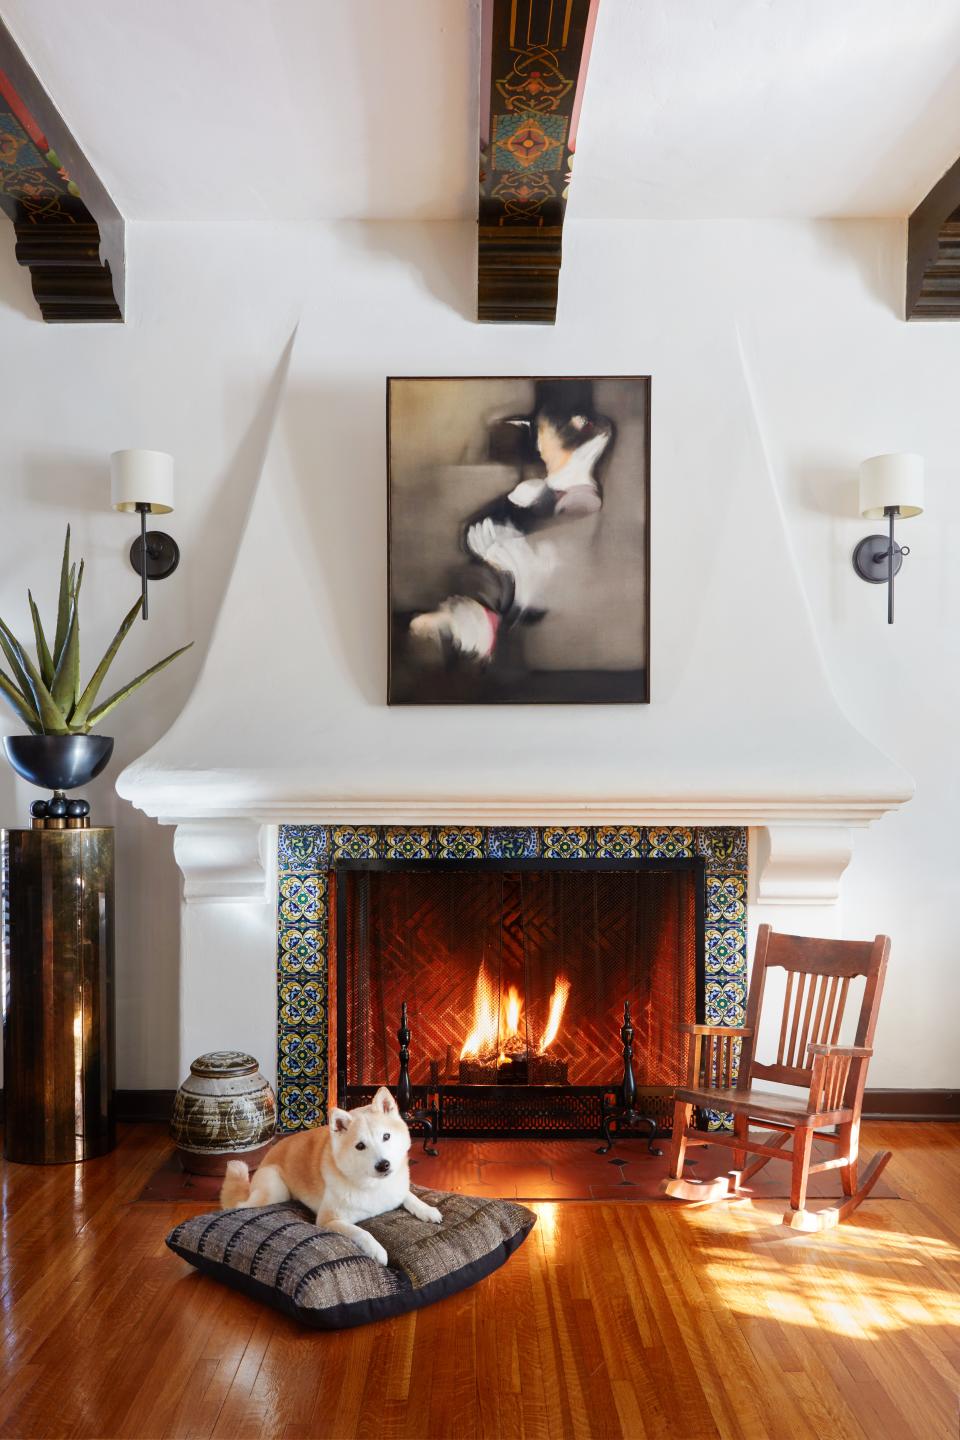 Beck, the designer’s Shiba Inu dog, cozies up to the fireplace.